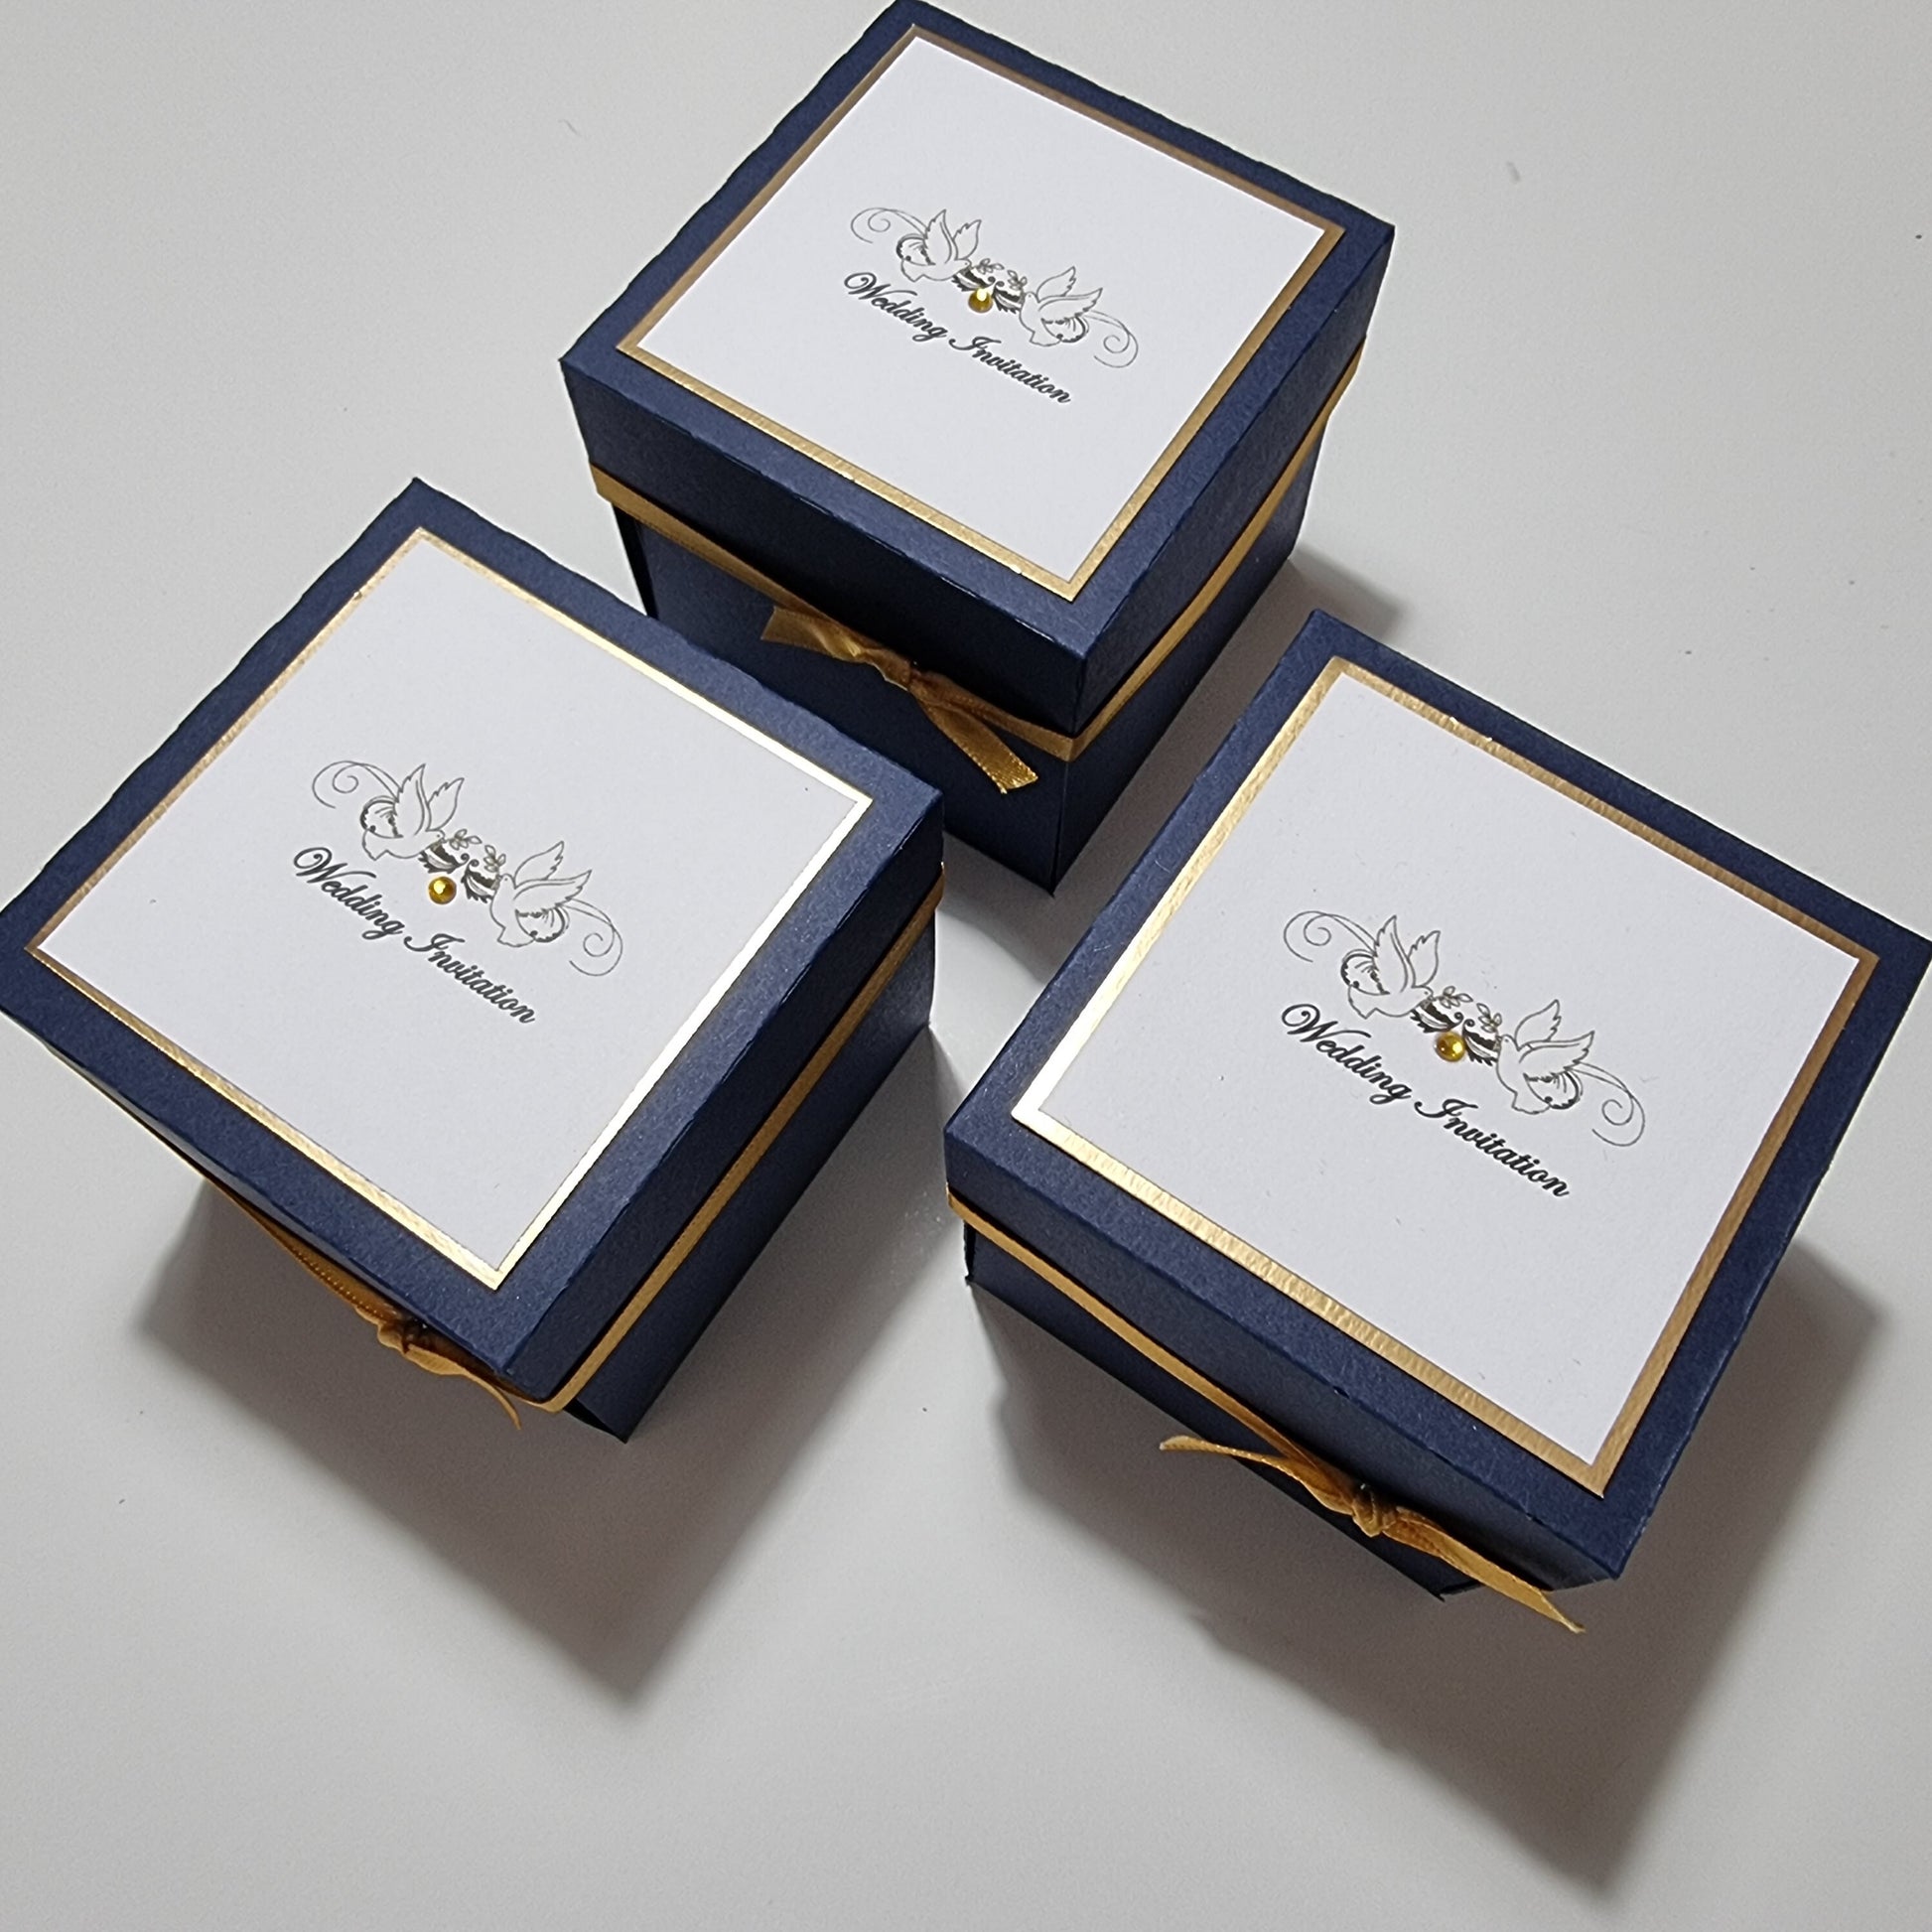 Hearts & Doves Range in Classic Navy Blue and Gold. Unique 3'' Square Exploding Wedding Invitation Box featuring two fixed panels, One with Invitation details and the other with Venue details. Gold gems.